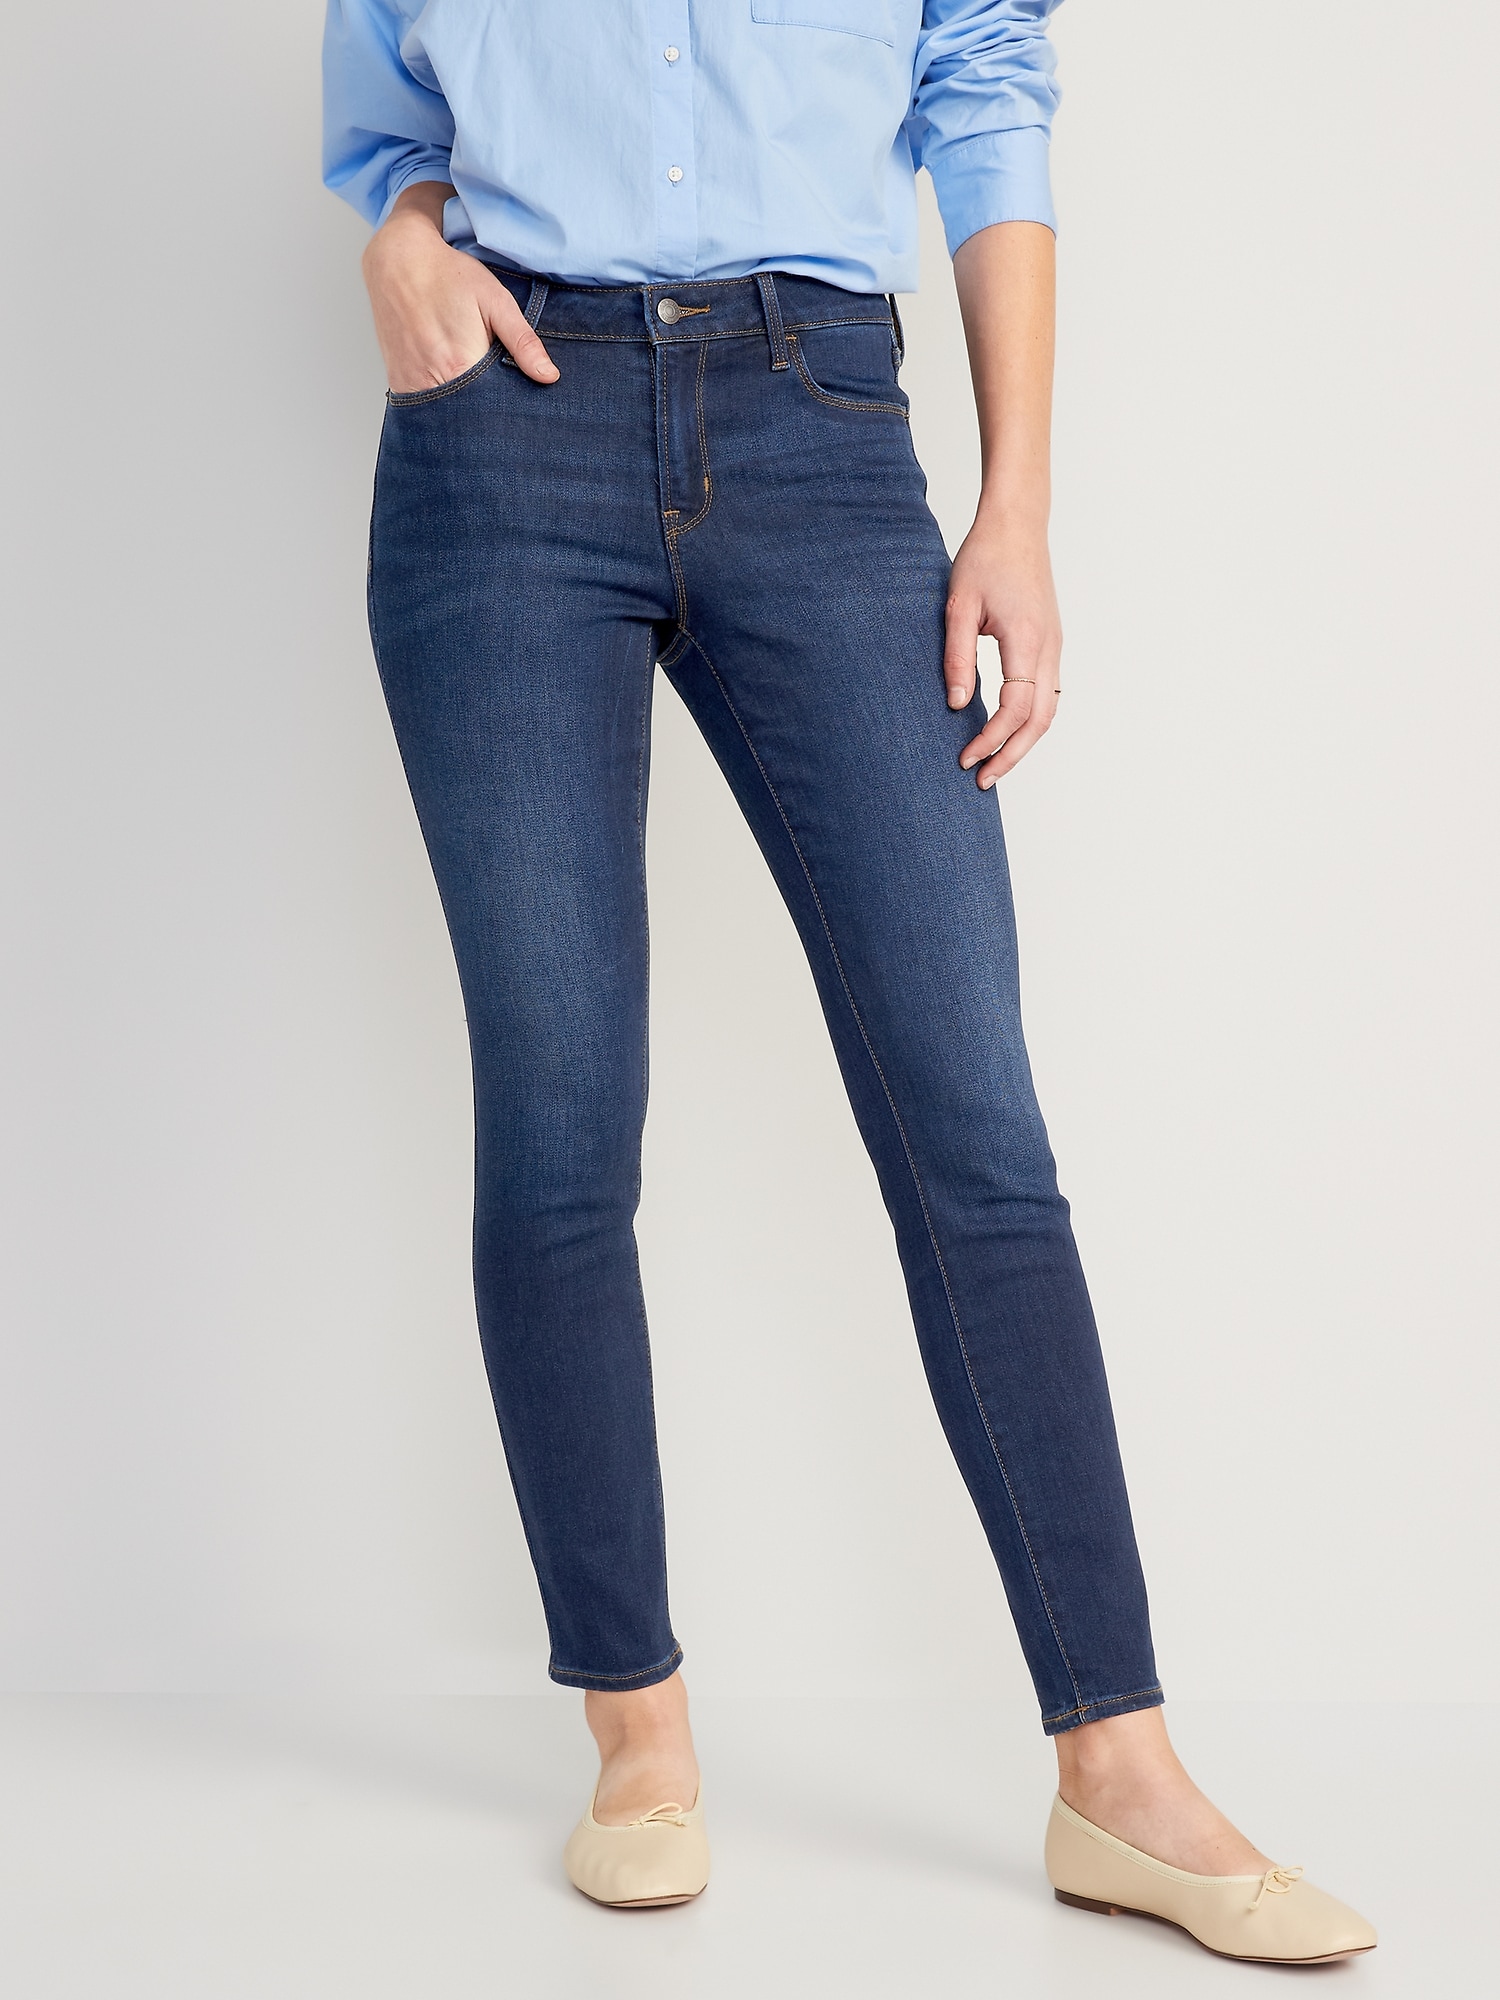 Smuk Ledsager Give Mid-Rise Pop Icon Skinny Jeans for Women | Old Navy